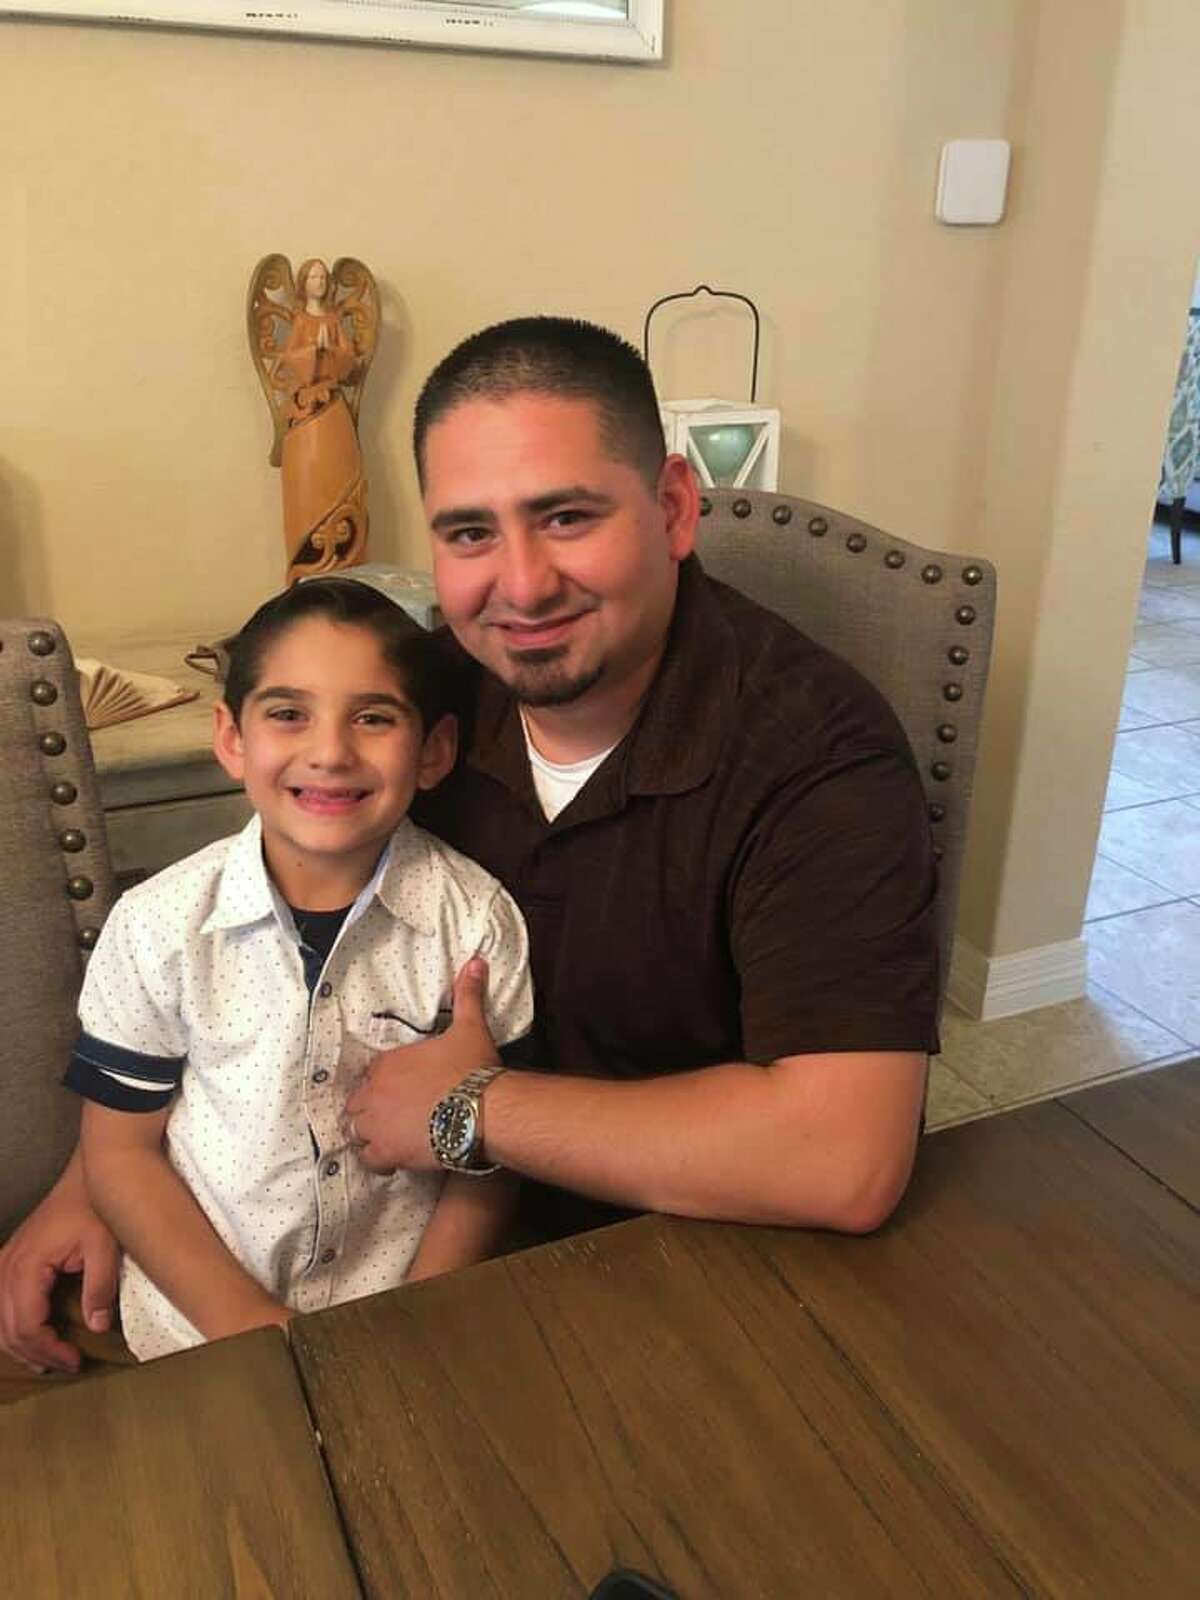 "When I asked him why he did it, he said, 'They fight for our country and protect us'," said Vega. 6-year-old Jace Vega with his father, Joe Vega.